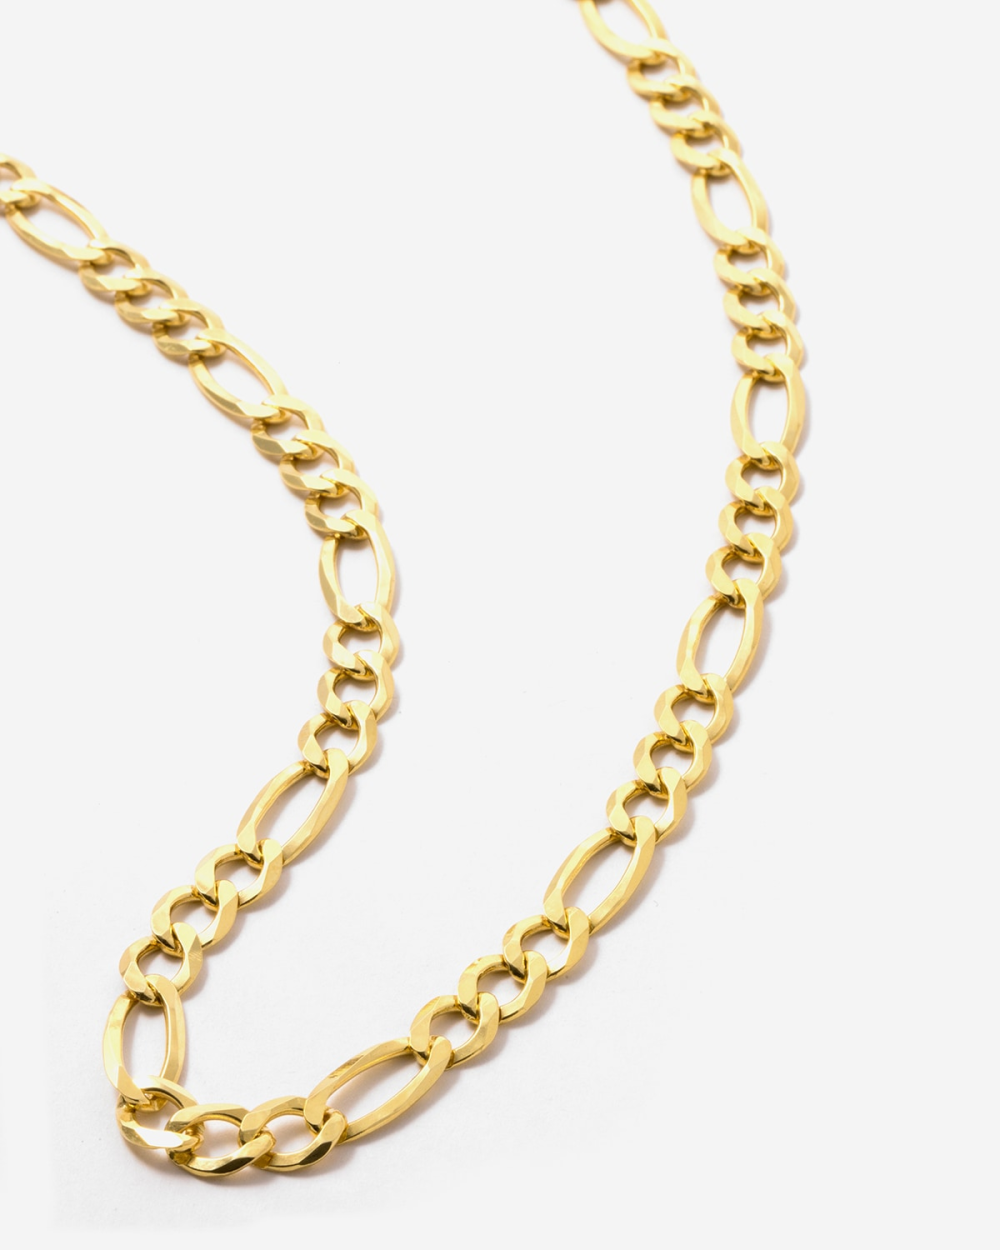 YELLOW GOLD 3+1 WIDE CURB LINK NECKLACE